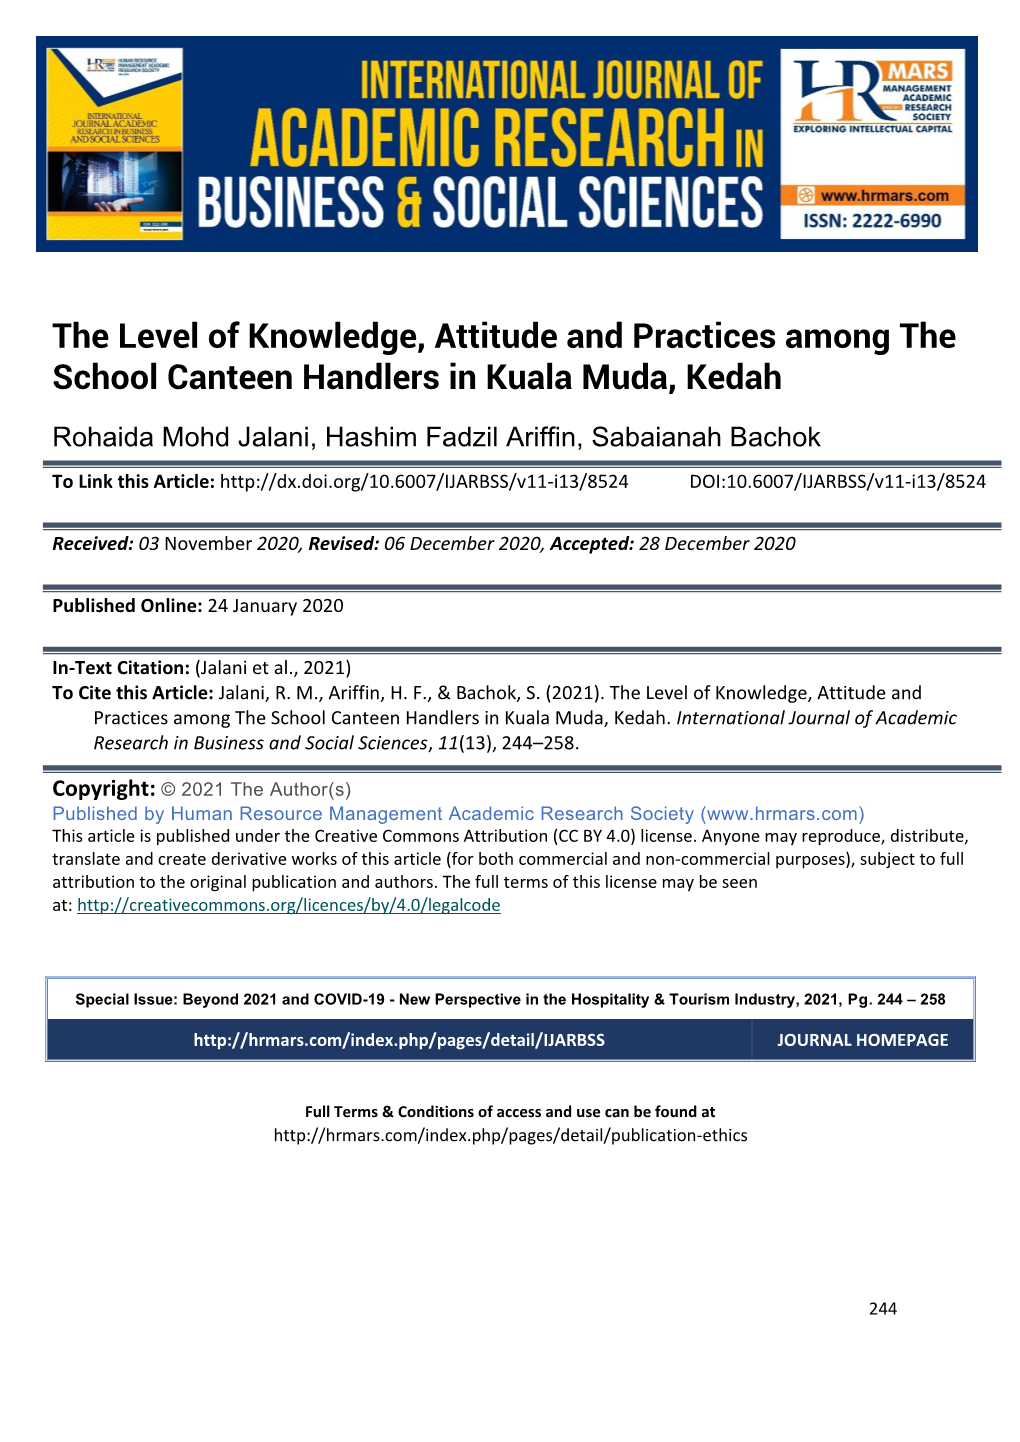 The Level of Knowledge, Attitude and Practices Among the School Canteen Handlers in Kuala Muda, Kedah